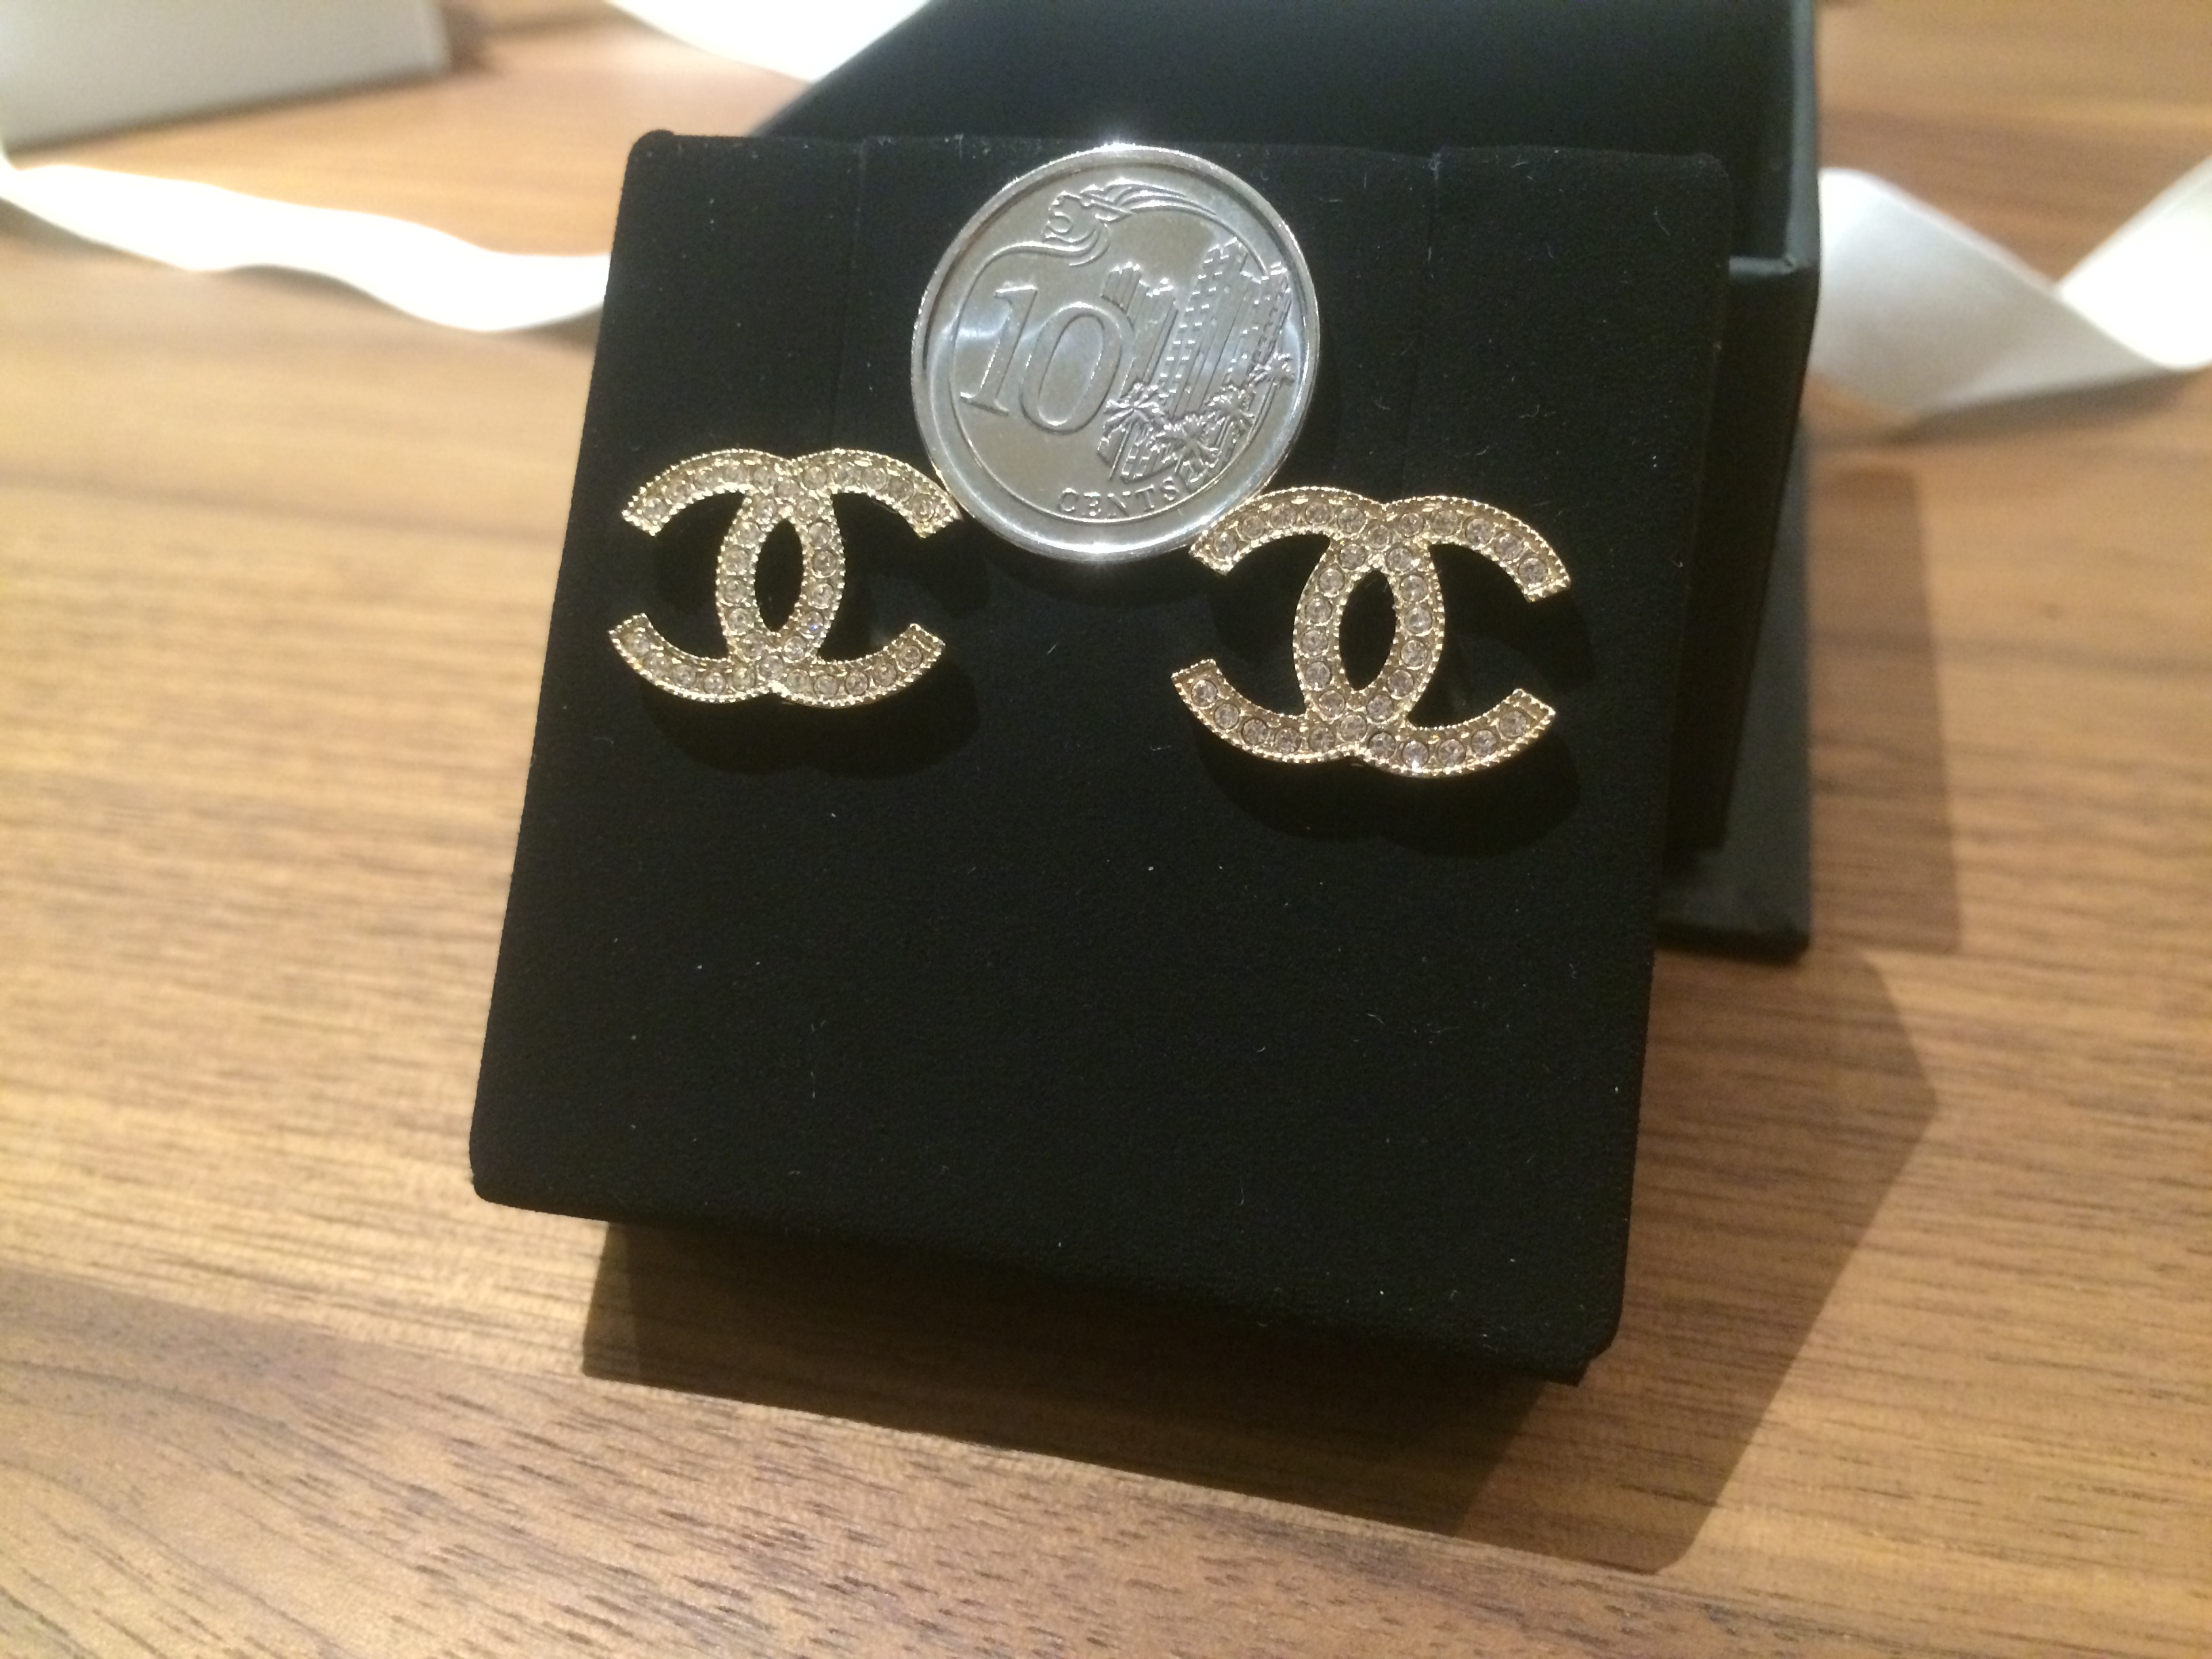 SOLD] FOR DOUBLE C CLASSIC CHANEL EARRINGS (GOLD) Branded Singapore